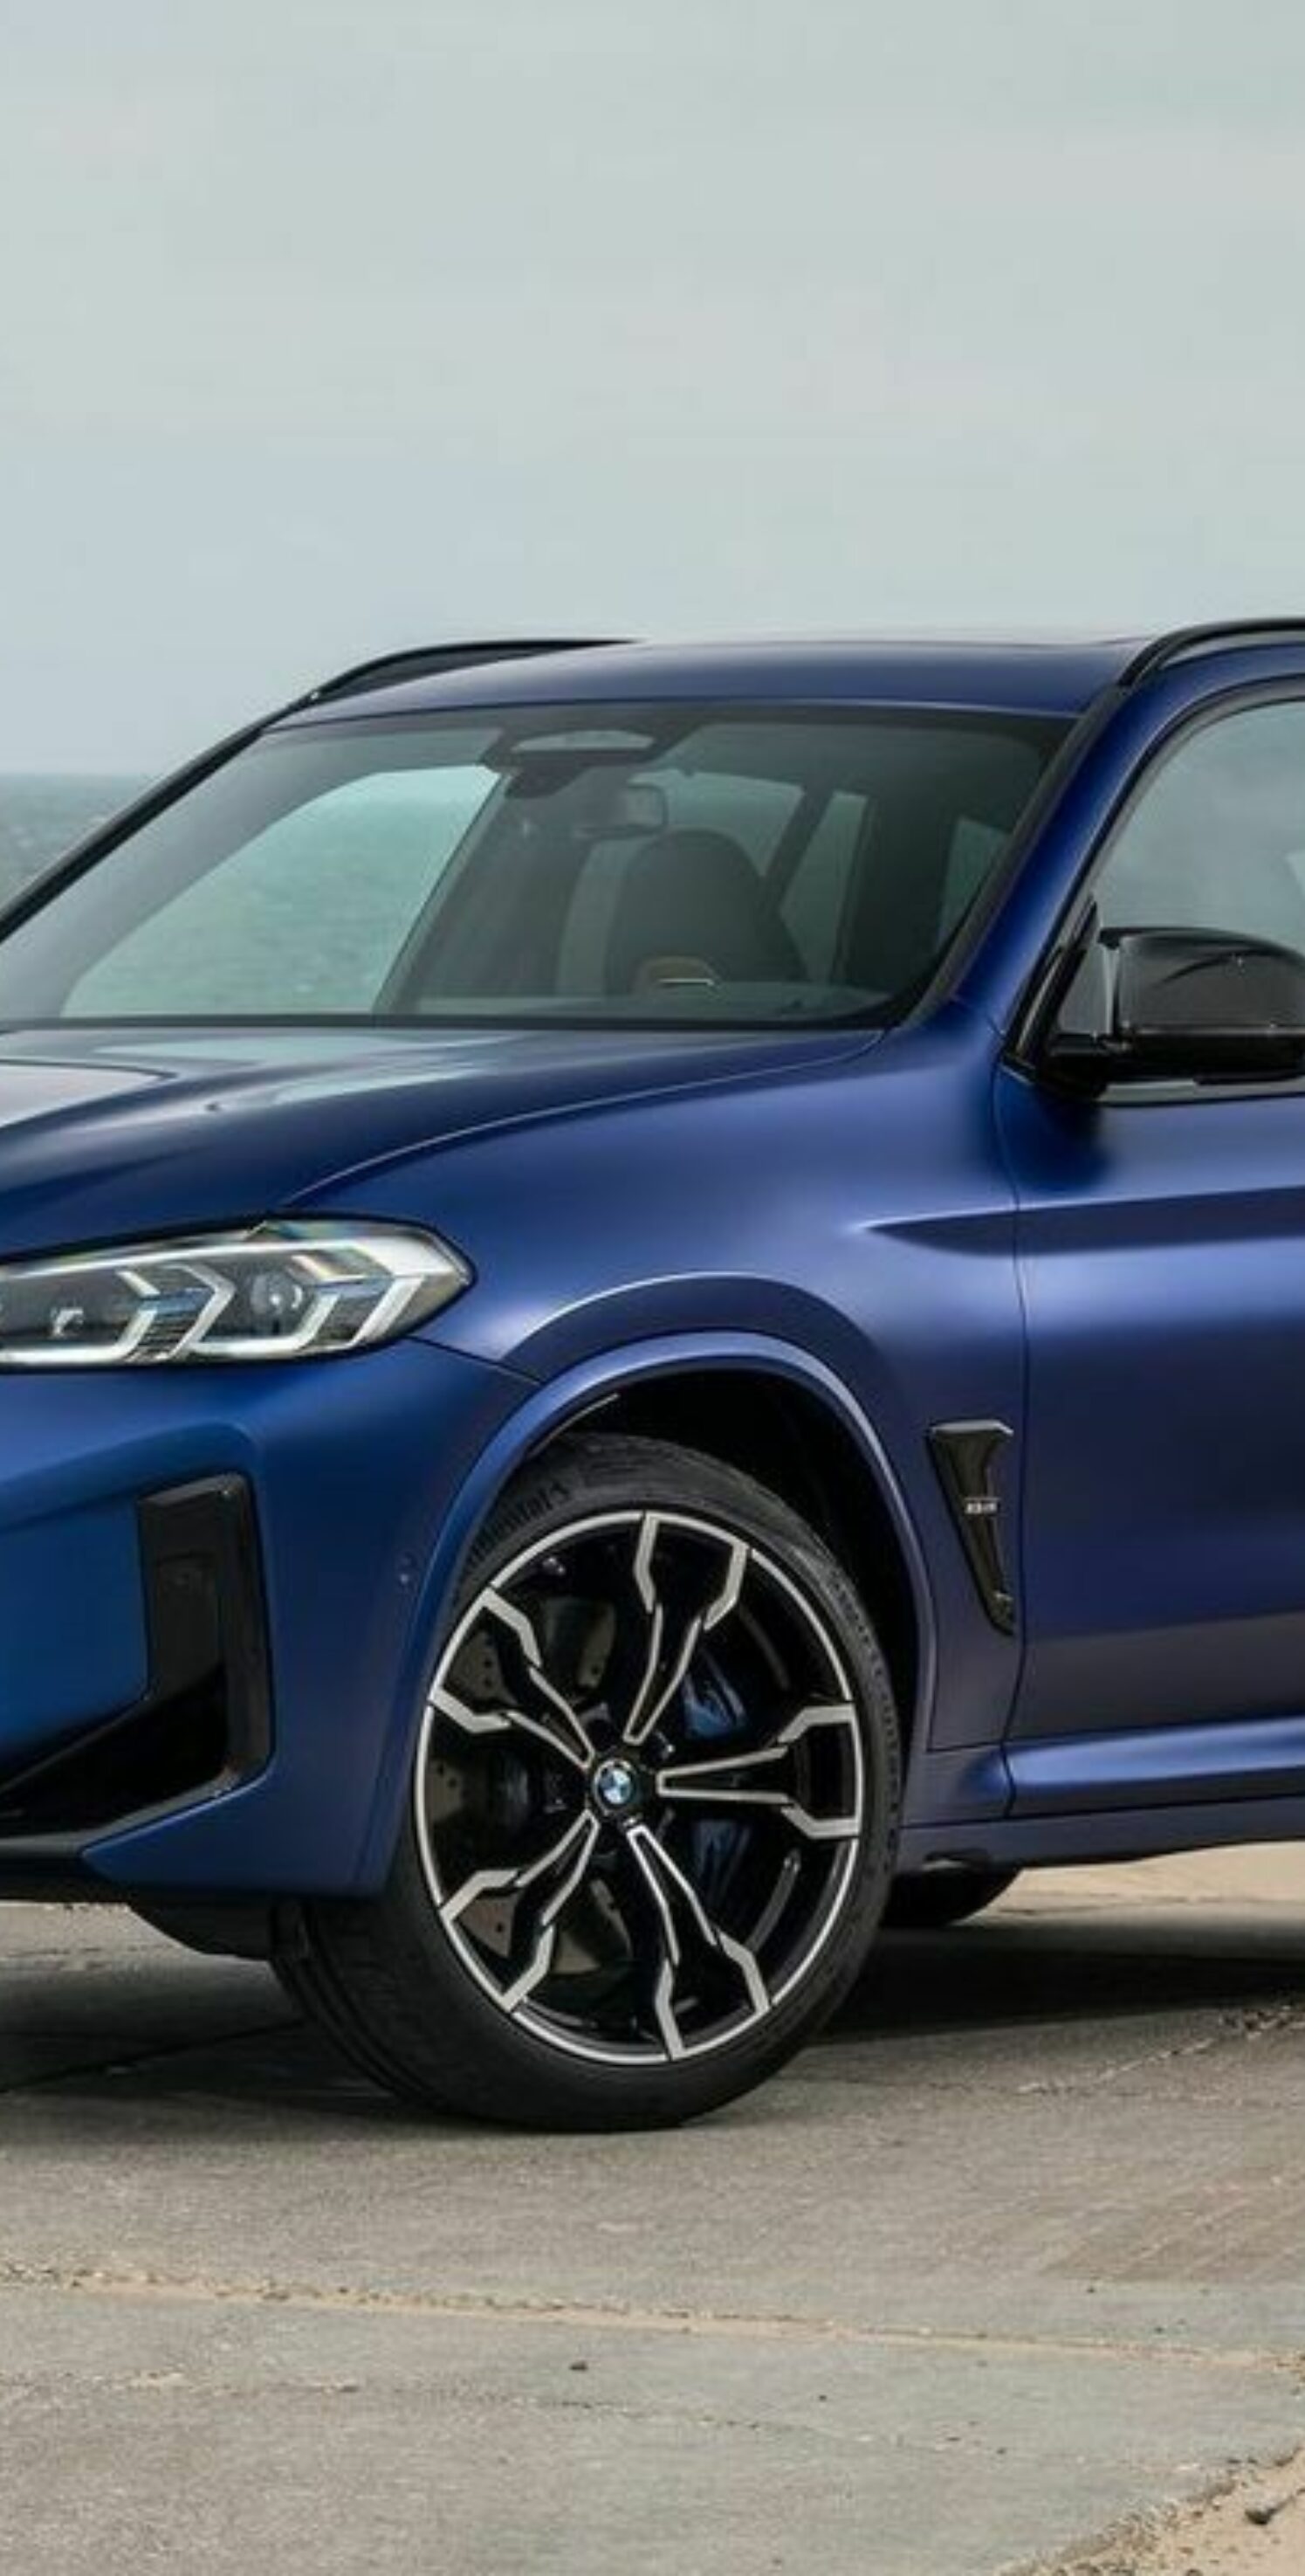 https://autofilter.sk/assets/images/x3/gallery/bmw-x3-m-competition-2022_09-galeria.jpg - obrazok